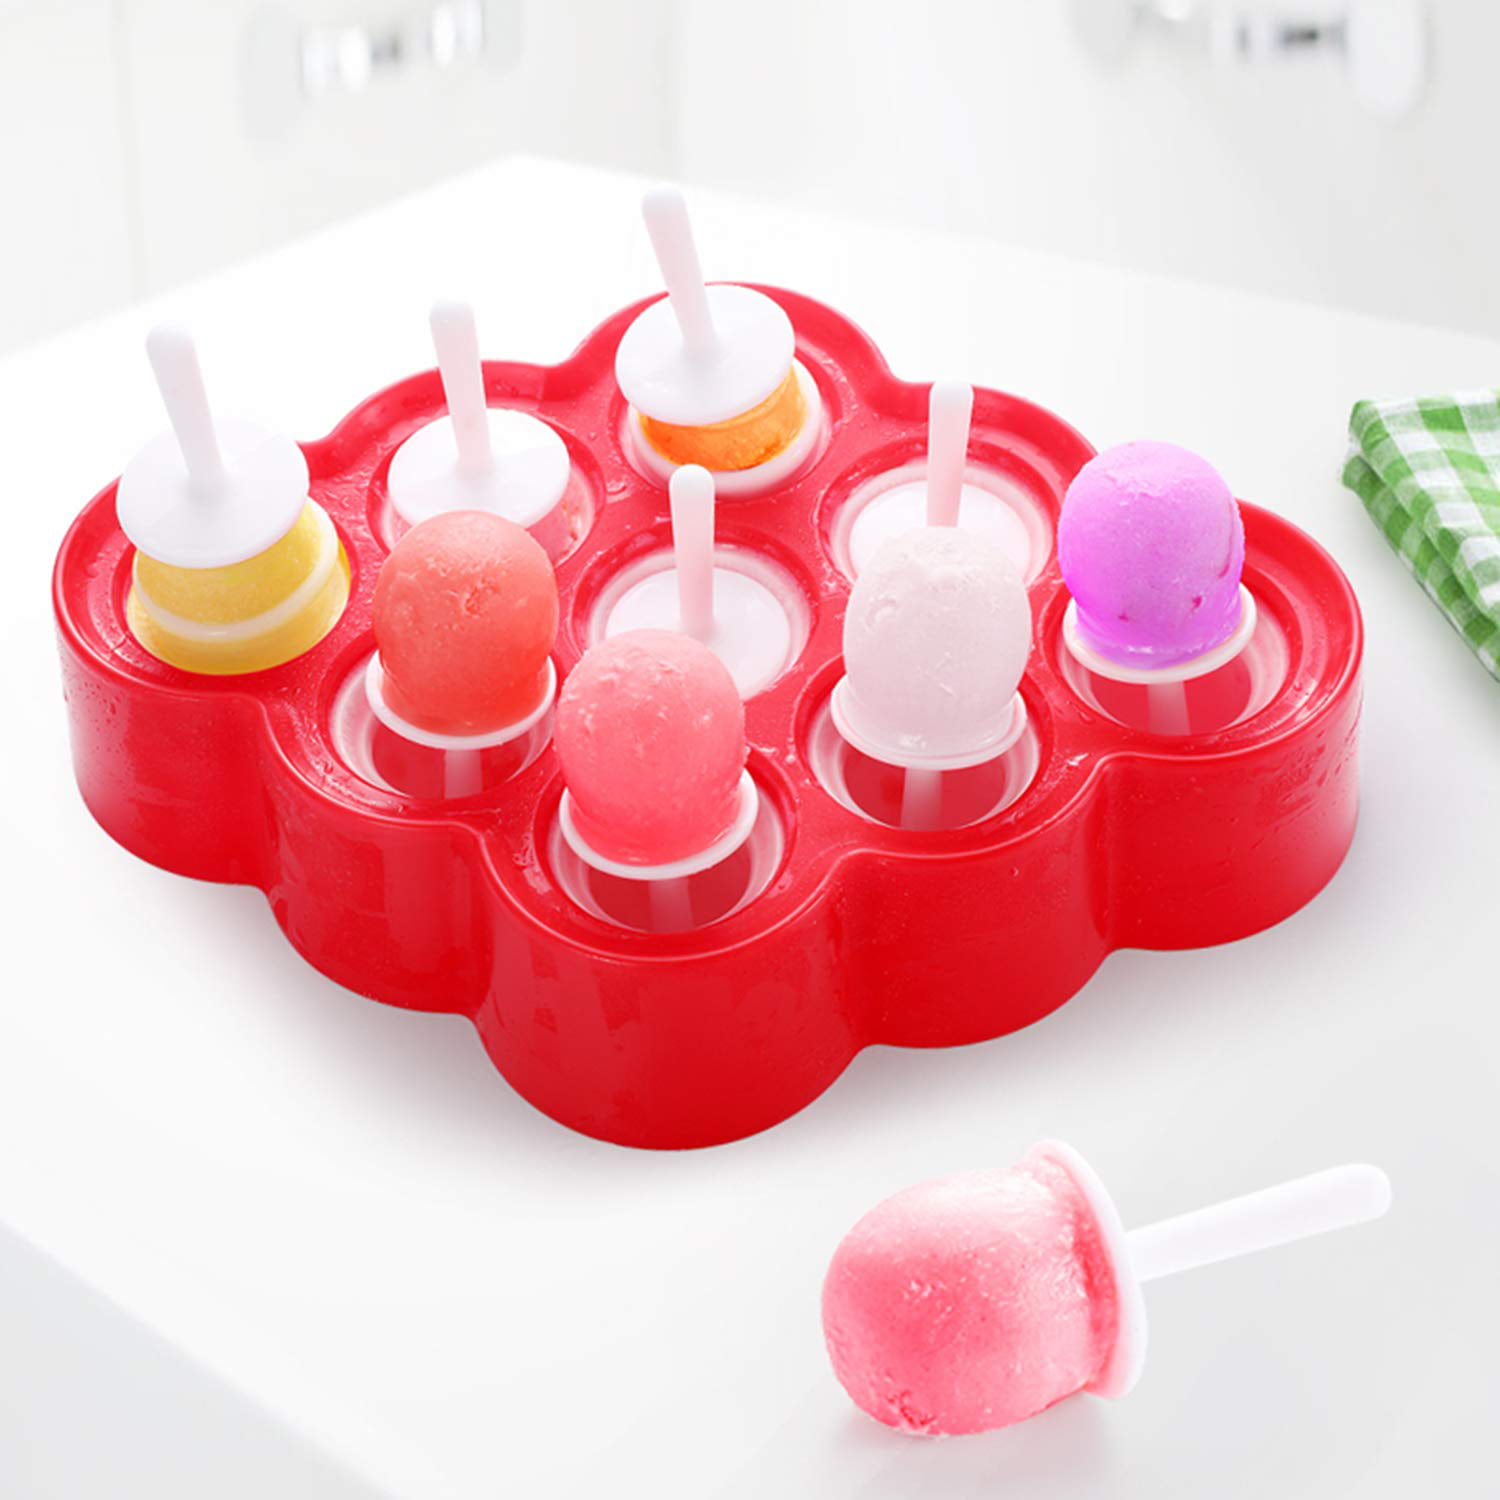 Popsicle Molds for Kids Silicone BPA Free with 2 Extra Reusable Sticks No Mess Large Popsicle Makers Molds and Ice Cream Freezer Popsicle Molds Popsicle Molds Dishwasher Safe and Easy Release 